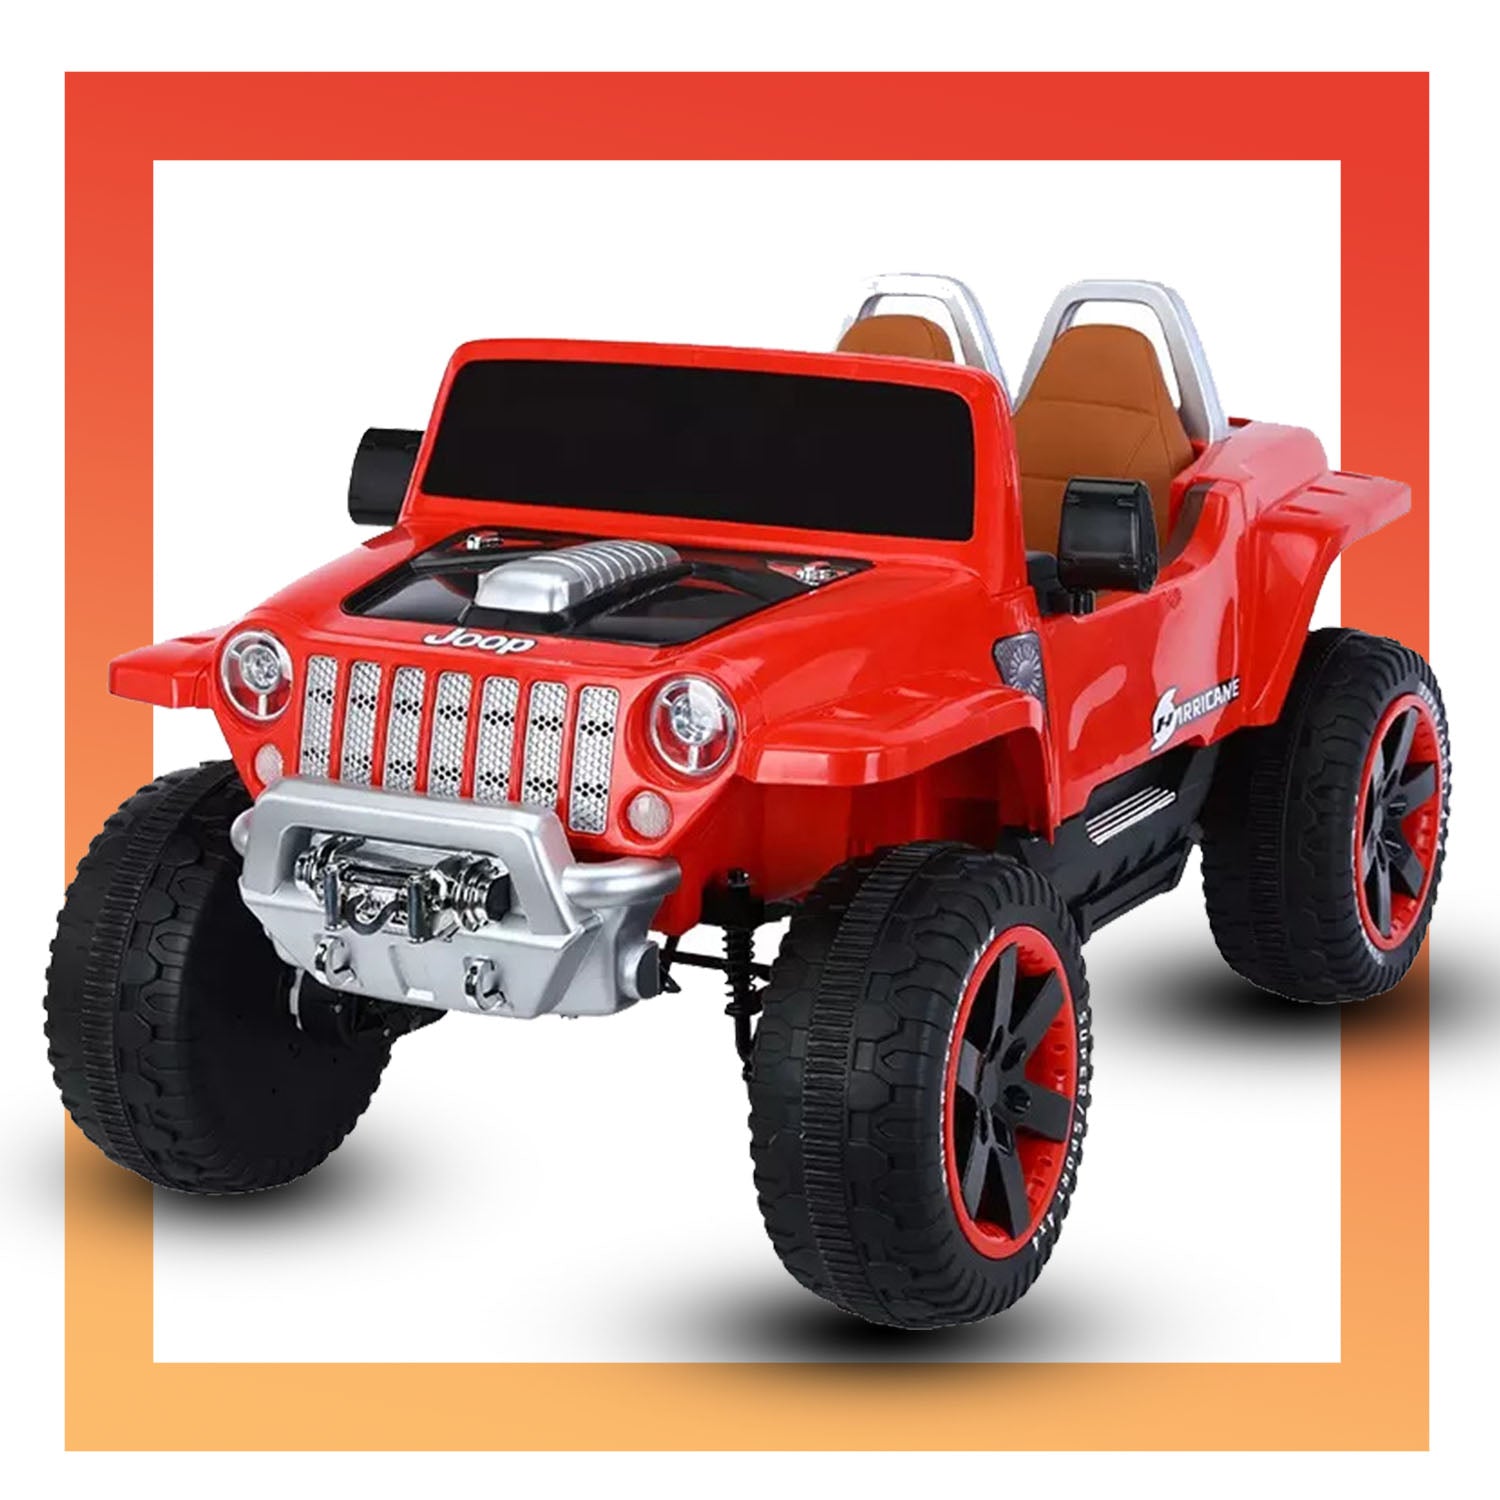 Fliptoy™ Hurricane Kids Car, Baby Toy Car, Rechargeable Battery